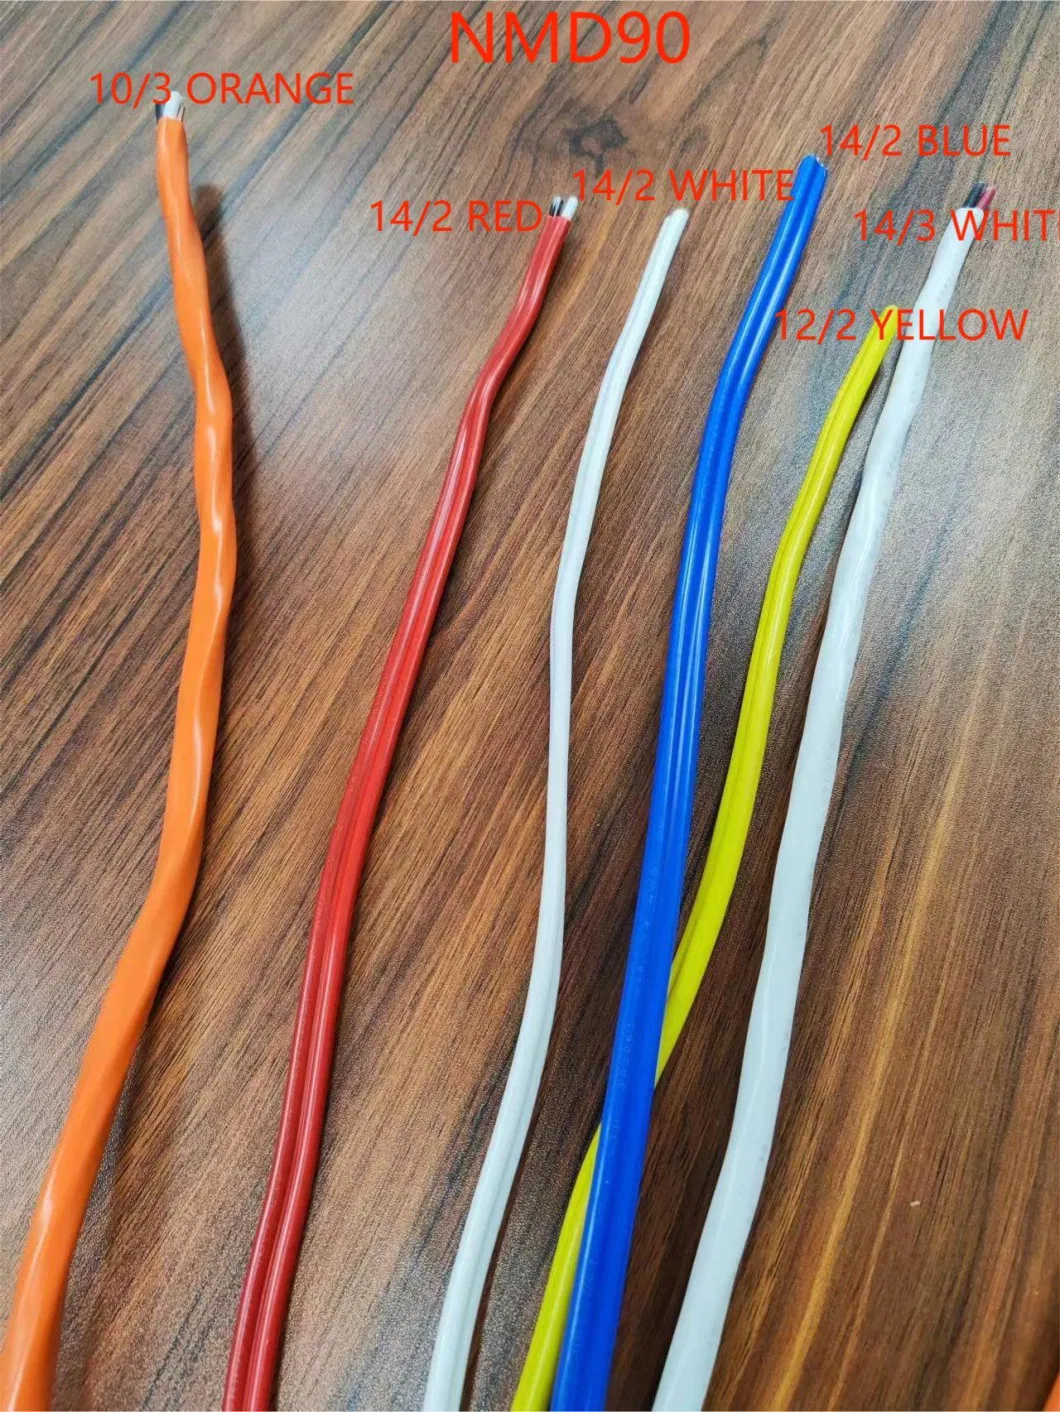 Building Wire 14/2 14/3 12-2 AWG Nmd90 CSA Certified